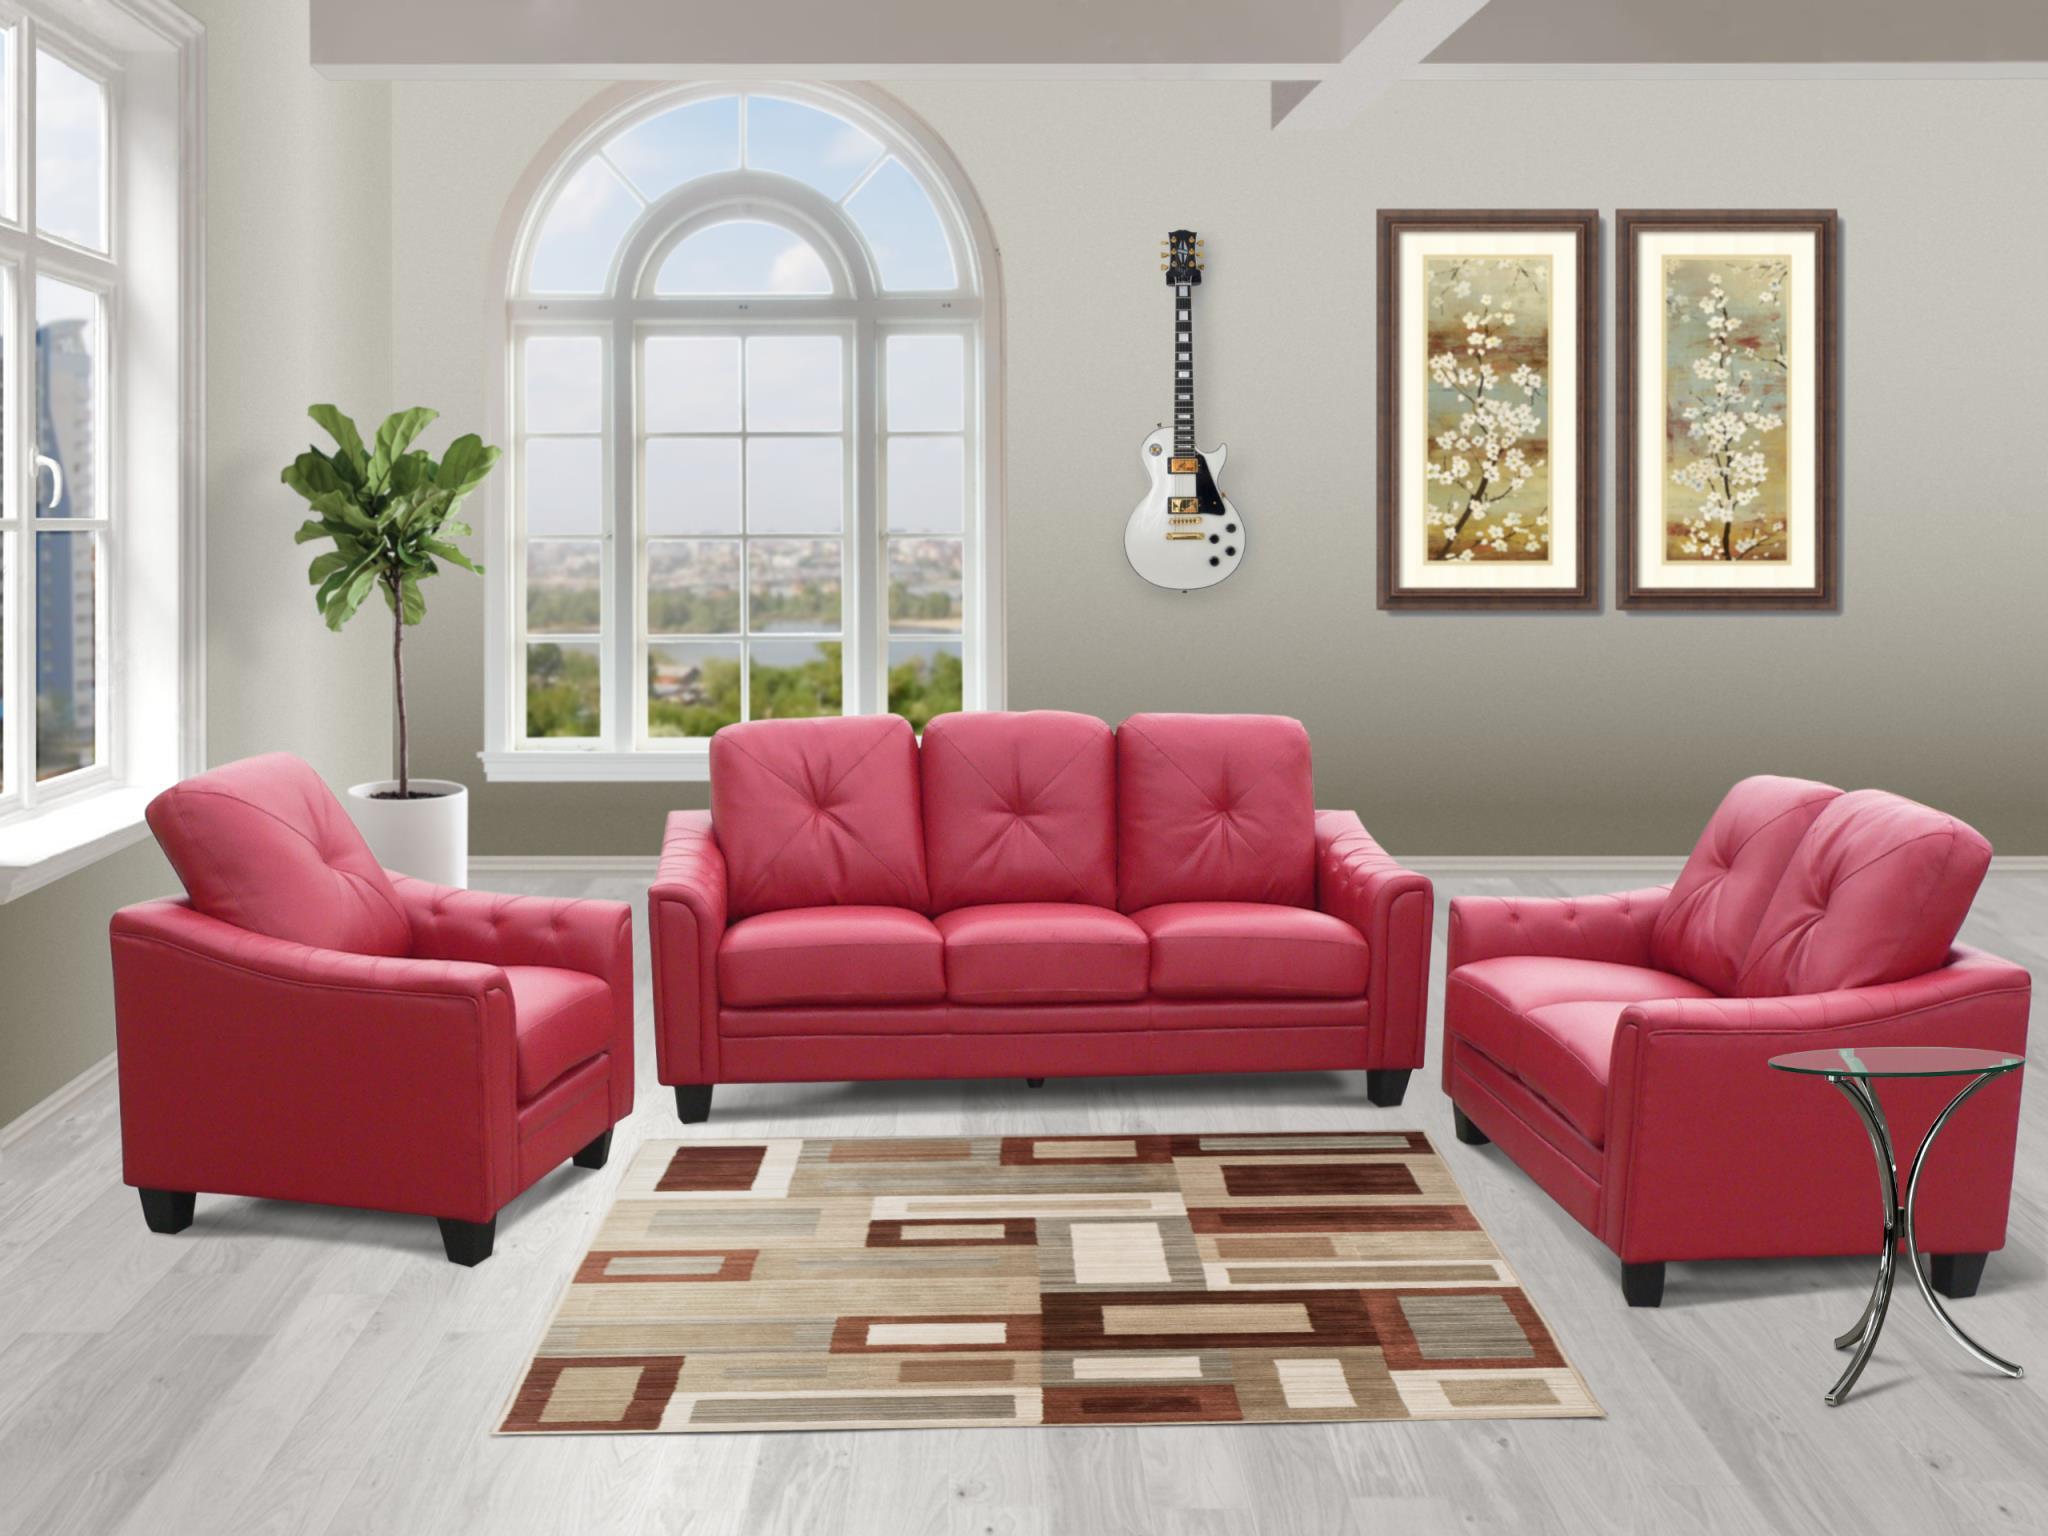 Classic, Traditional Sofa Loveseat and Chair Set Walden 7606-RD-Set-3 in Red Bonded Leather